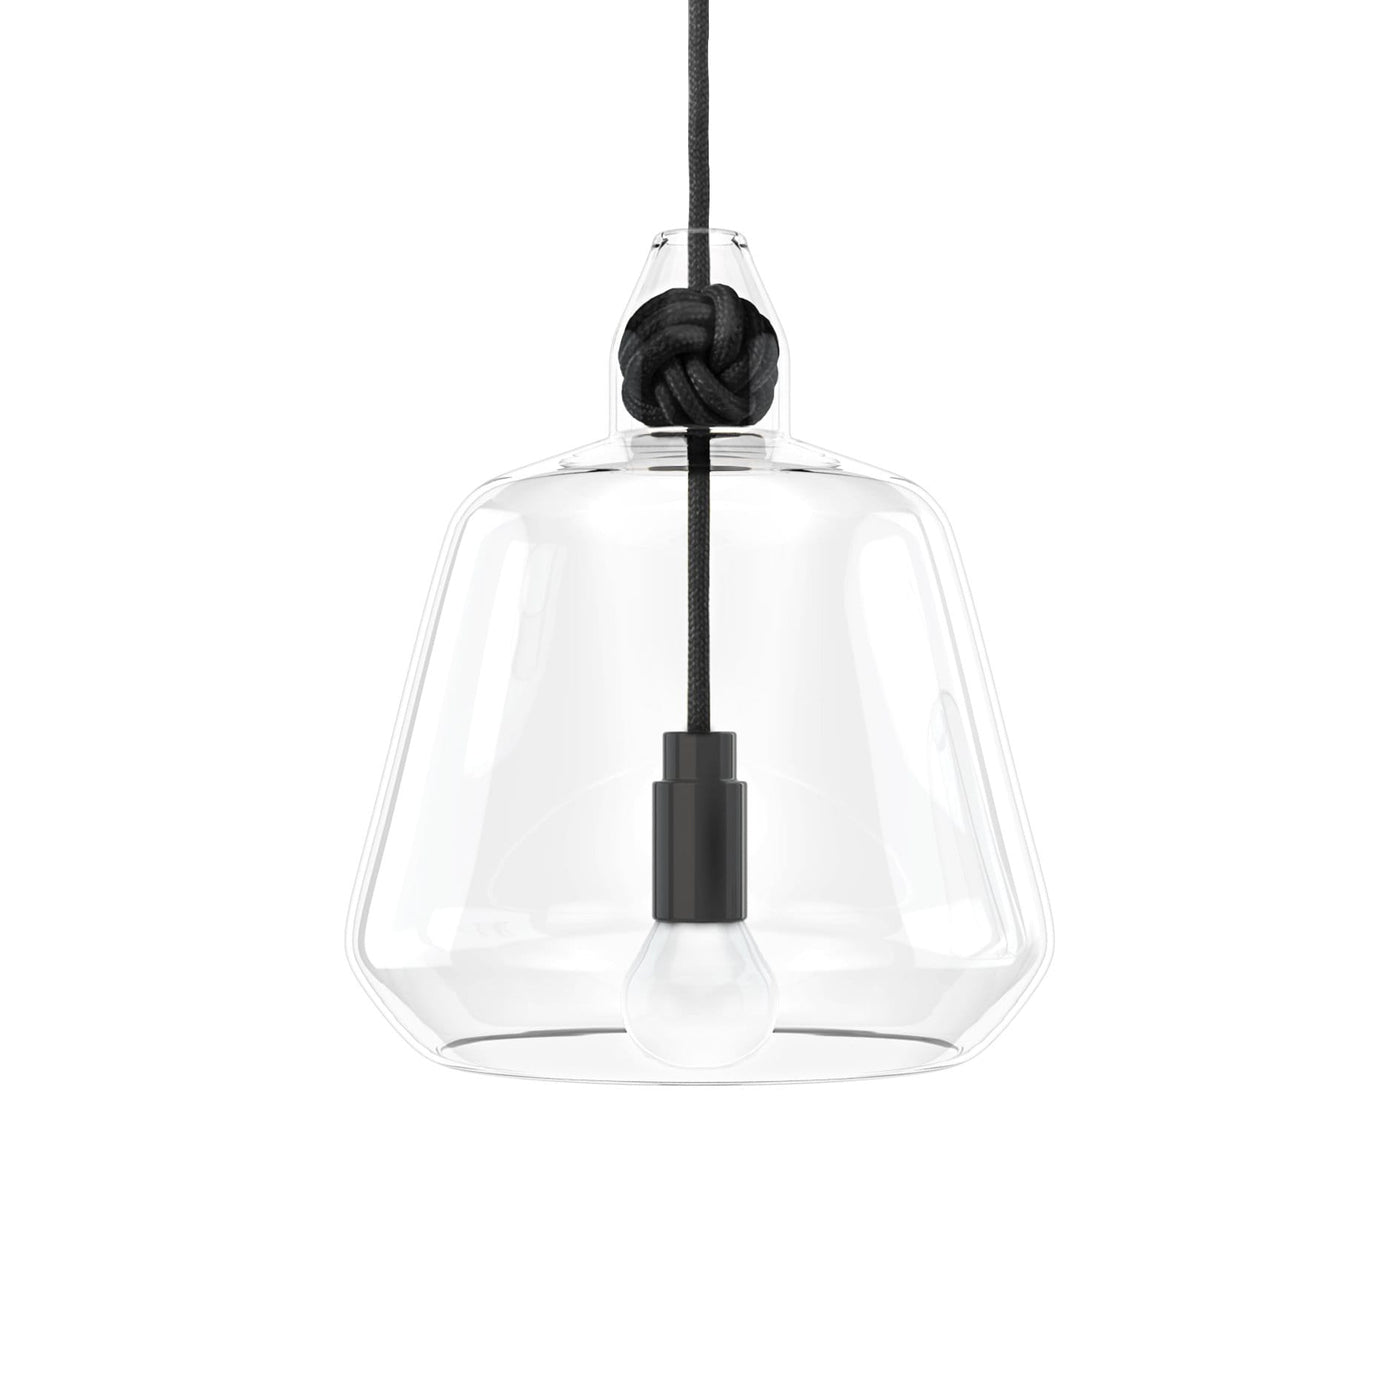 Vitamin Large Knot Pendant Lamp in black. Buy now from someday designs